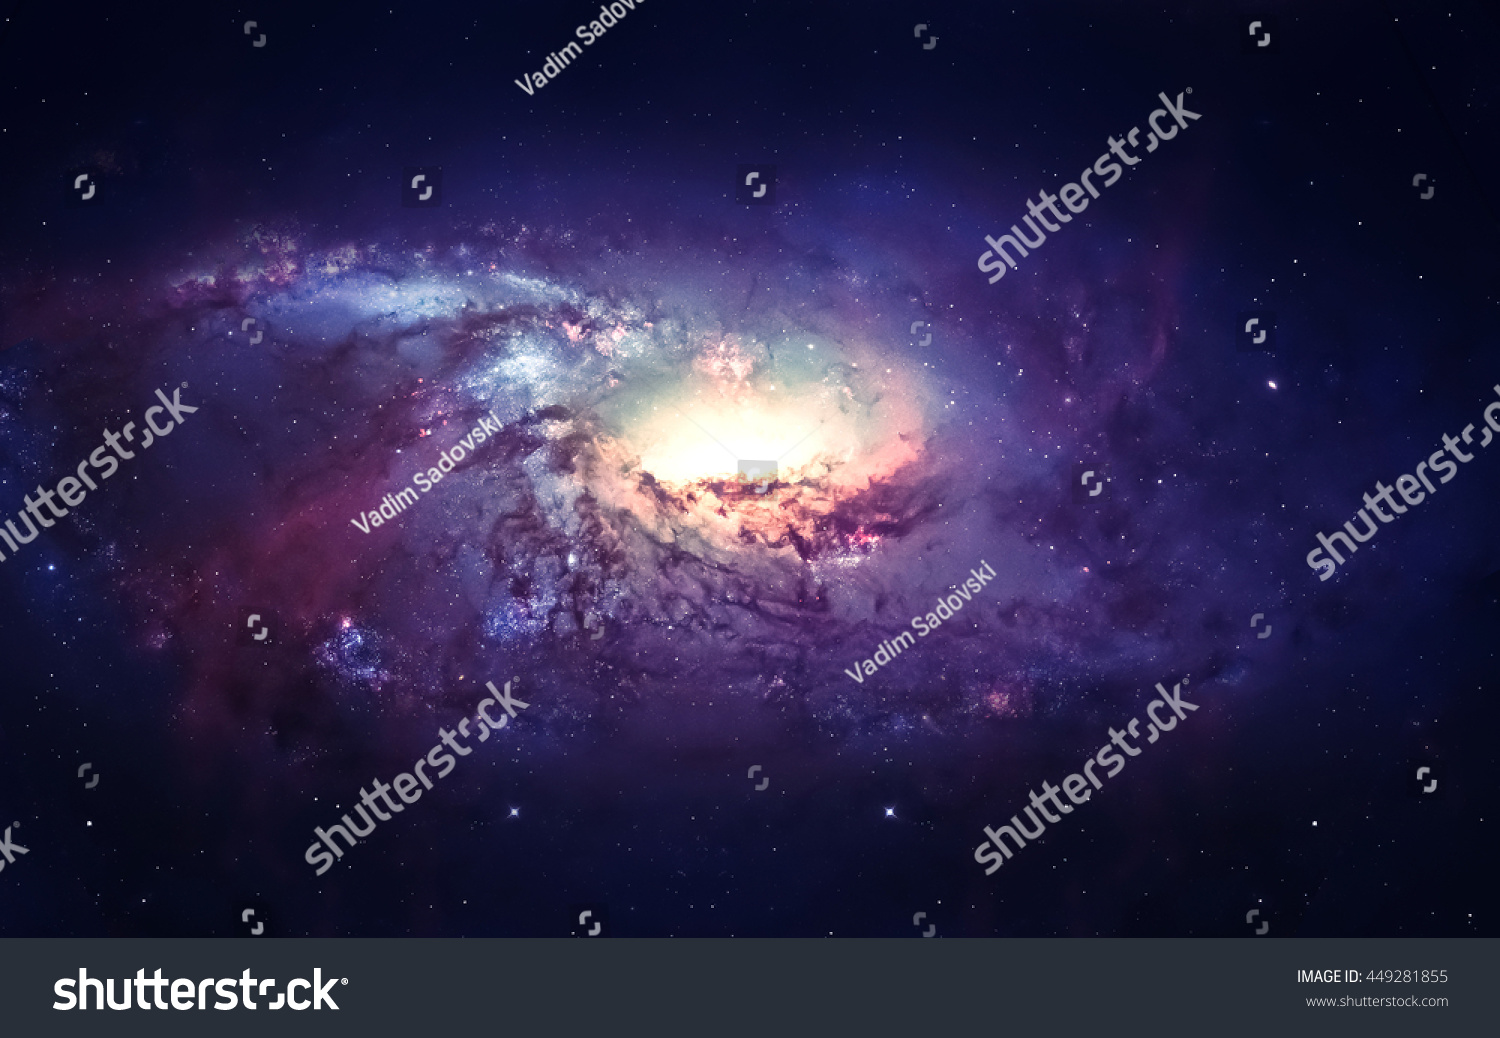 Galaxy in space, beauty of universe, black hole. Elements furnished by NASA #449281855